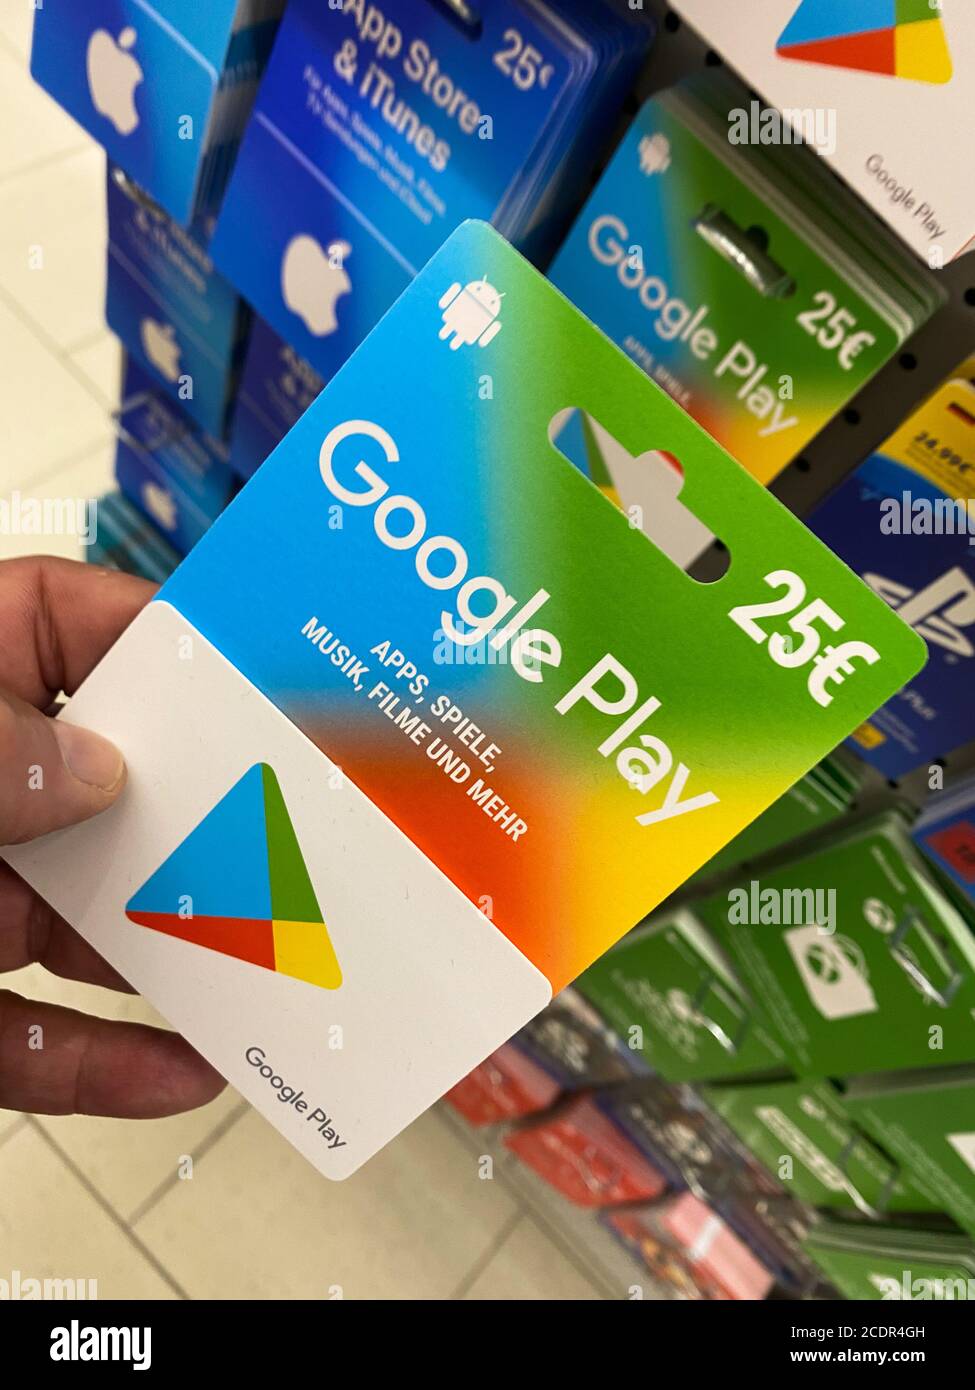 Viersen, Germany - July 9. 2020: View on google play gift voucher card hold by hand in german supermarket (focus on card) Stock Photo